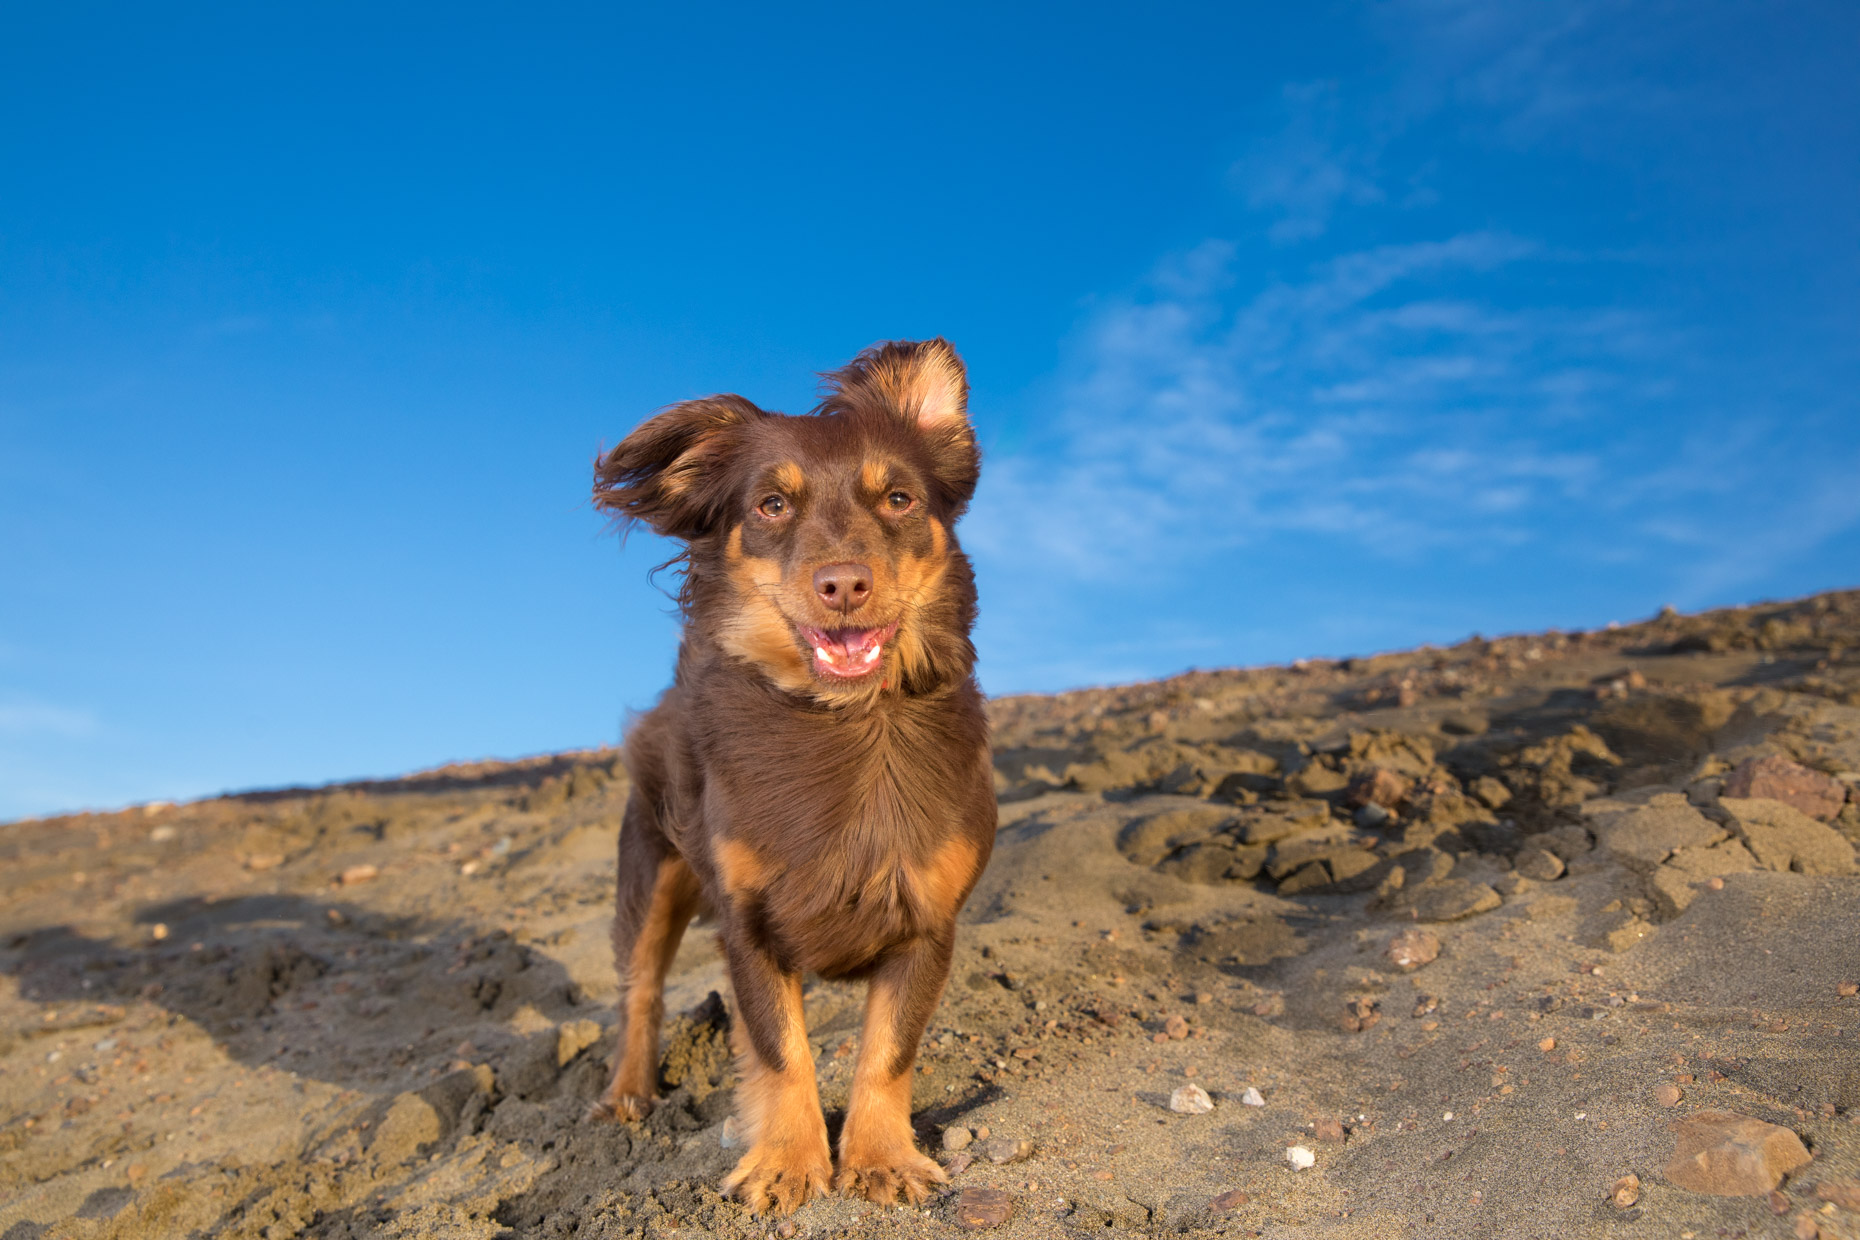 Small happy brown dog standing on sand dune under blue sky at San Francisco beach